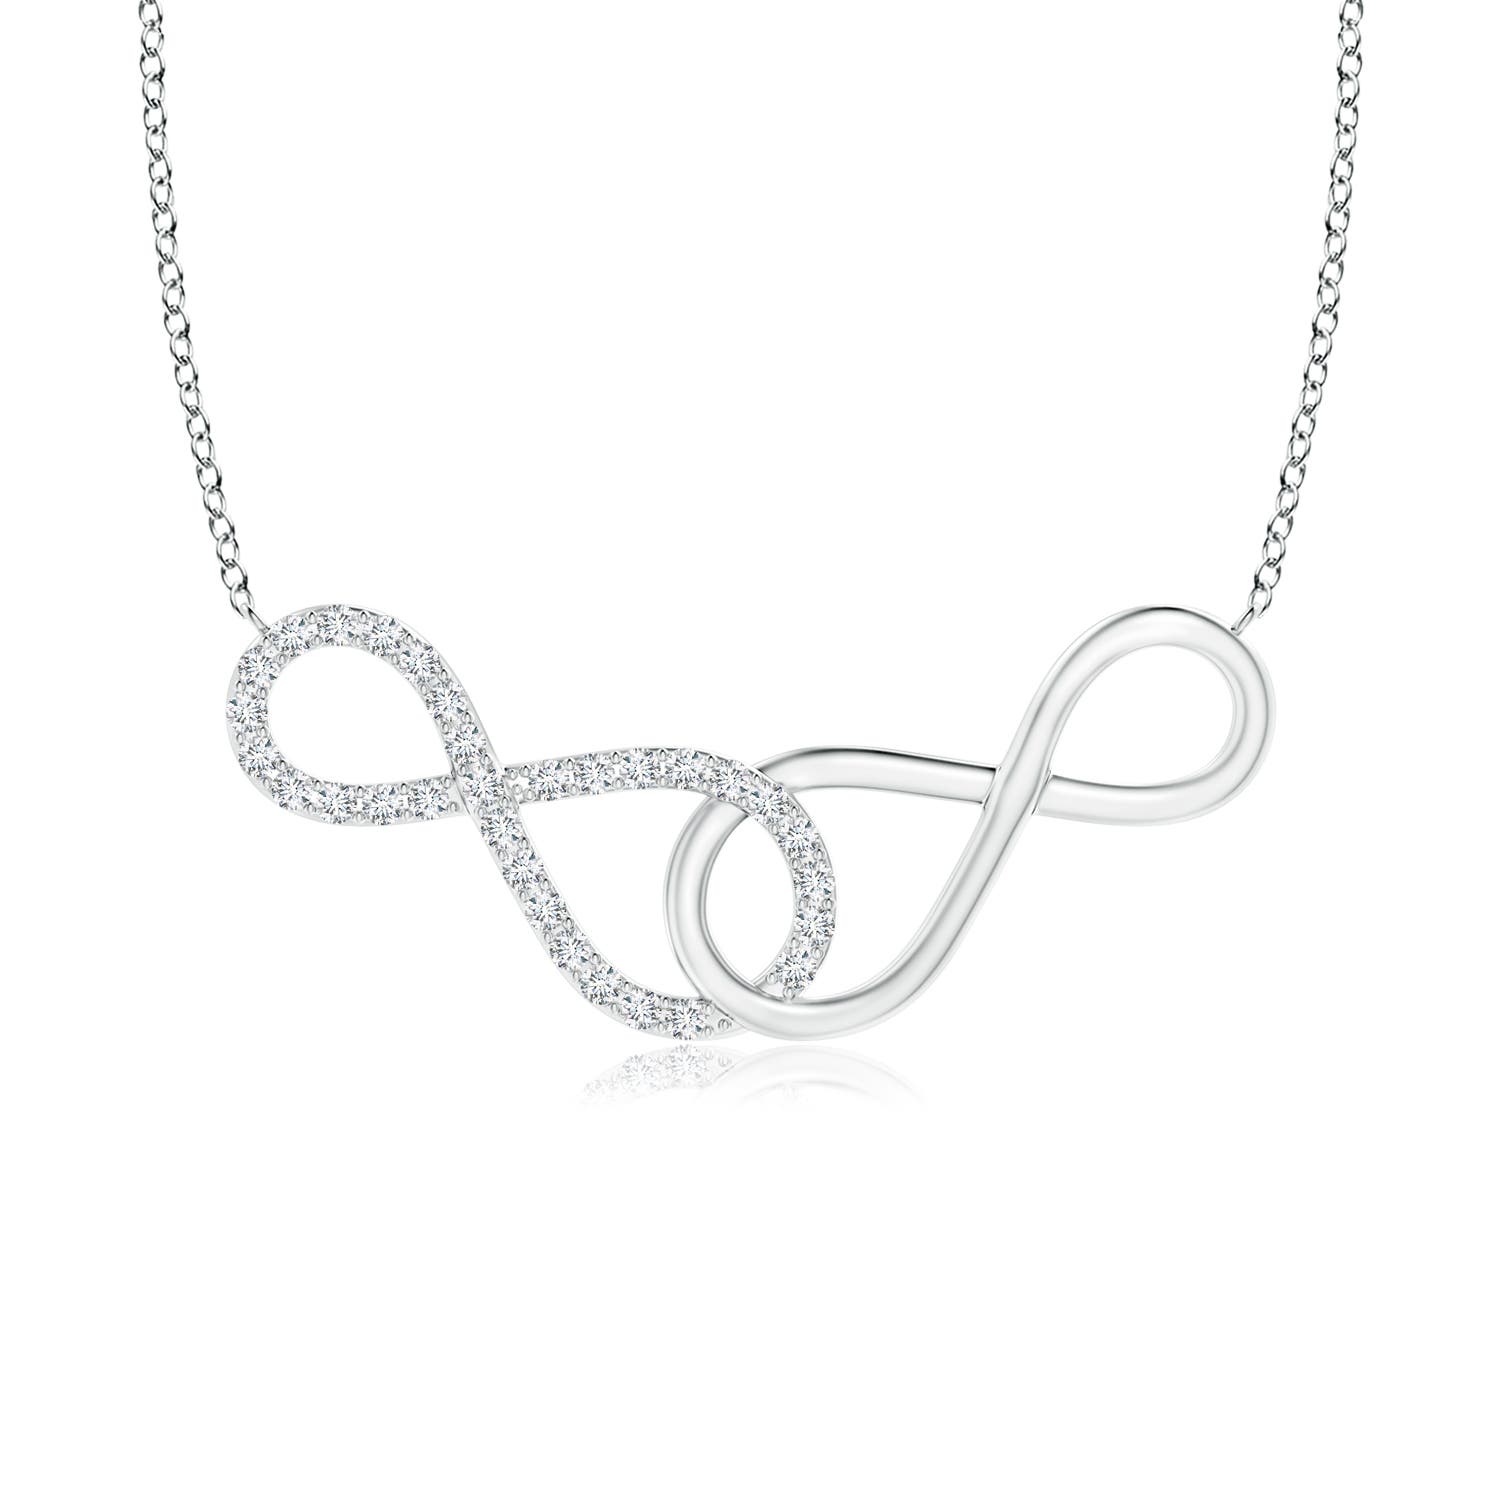 Black Diamond Accent Sideways Infinity Necklace in Sterling Silver - 16